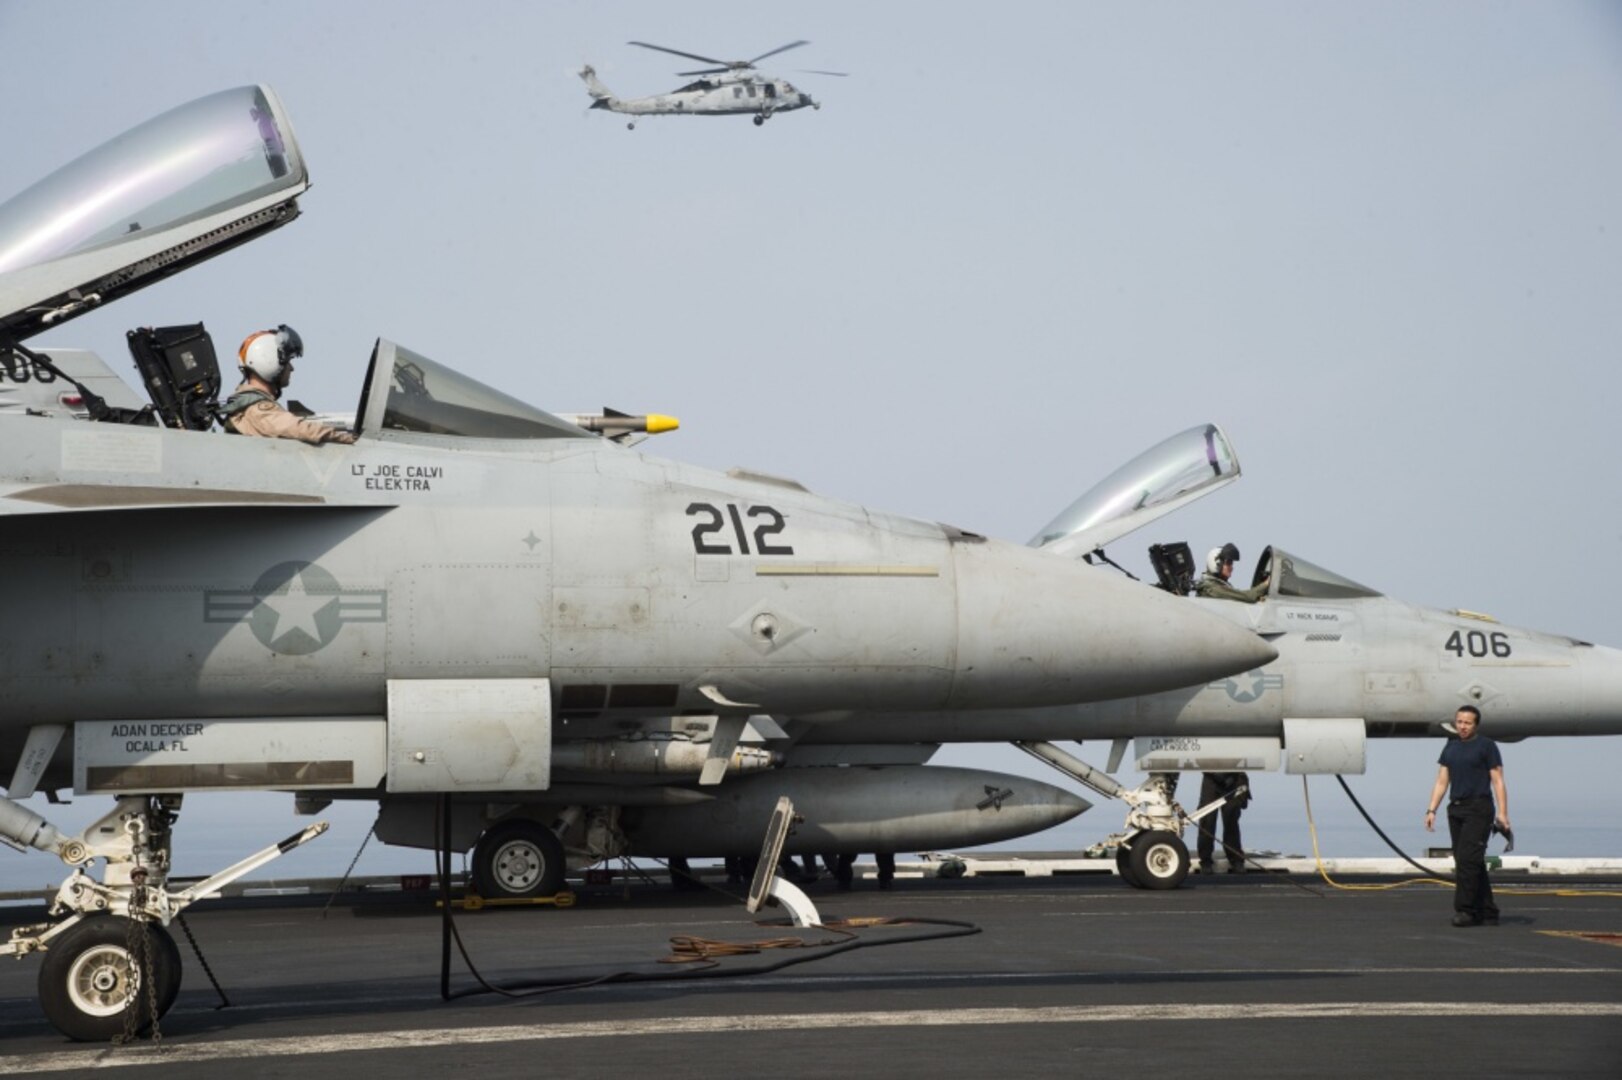 Two F/A-18E Super Hornets undergo preliminary checks on the flight deck of the aircraft carrier USS Dwight D. Eisenhower   in the Arabian Gulf, July 26, 2016. The USS Eisenhower and its Carrier Strike Group are deployed in support of Operation Inherent Resolve, maritime security operations and theater security cooperation efforts in the U.S. 5th Fleet area of operations. Navy photo by Petty Officer 3rd Class Theodore Quintana